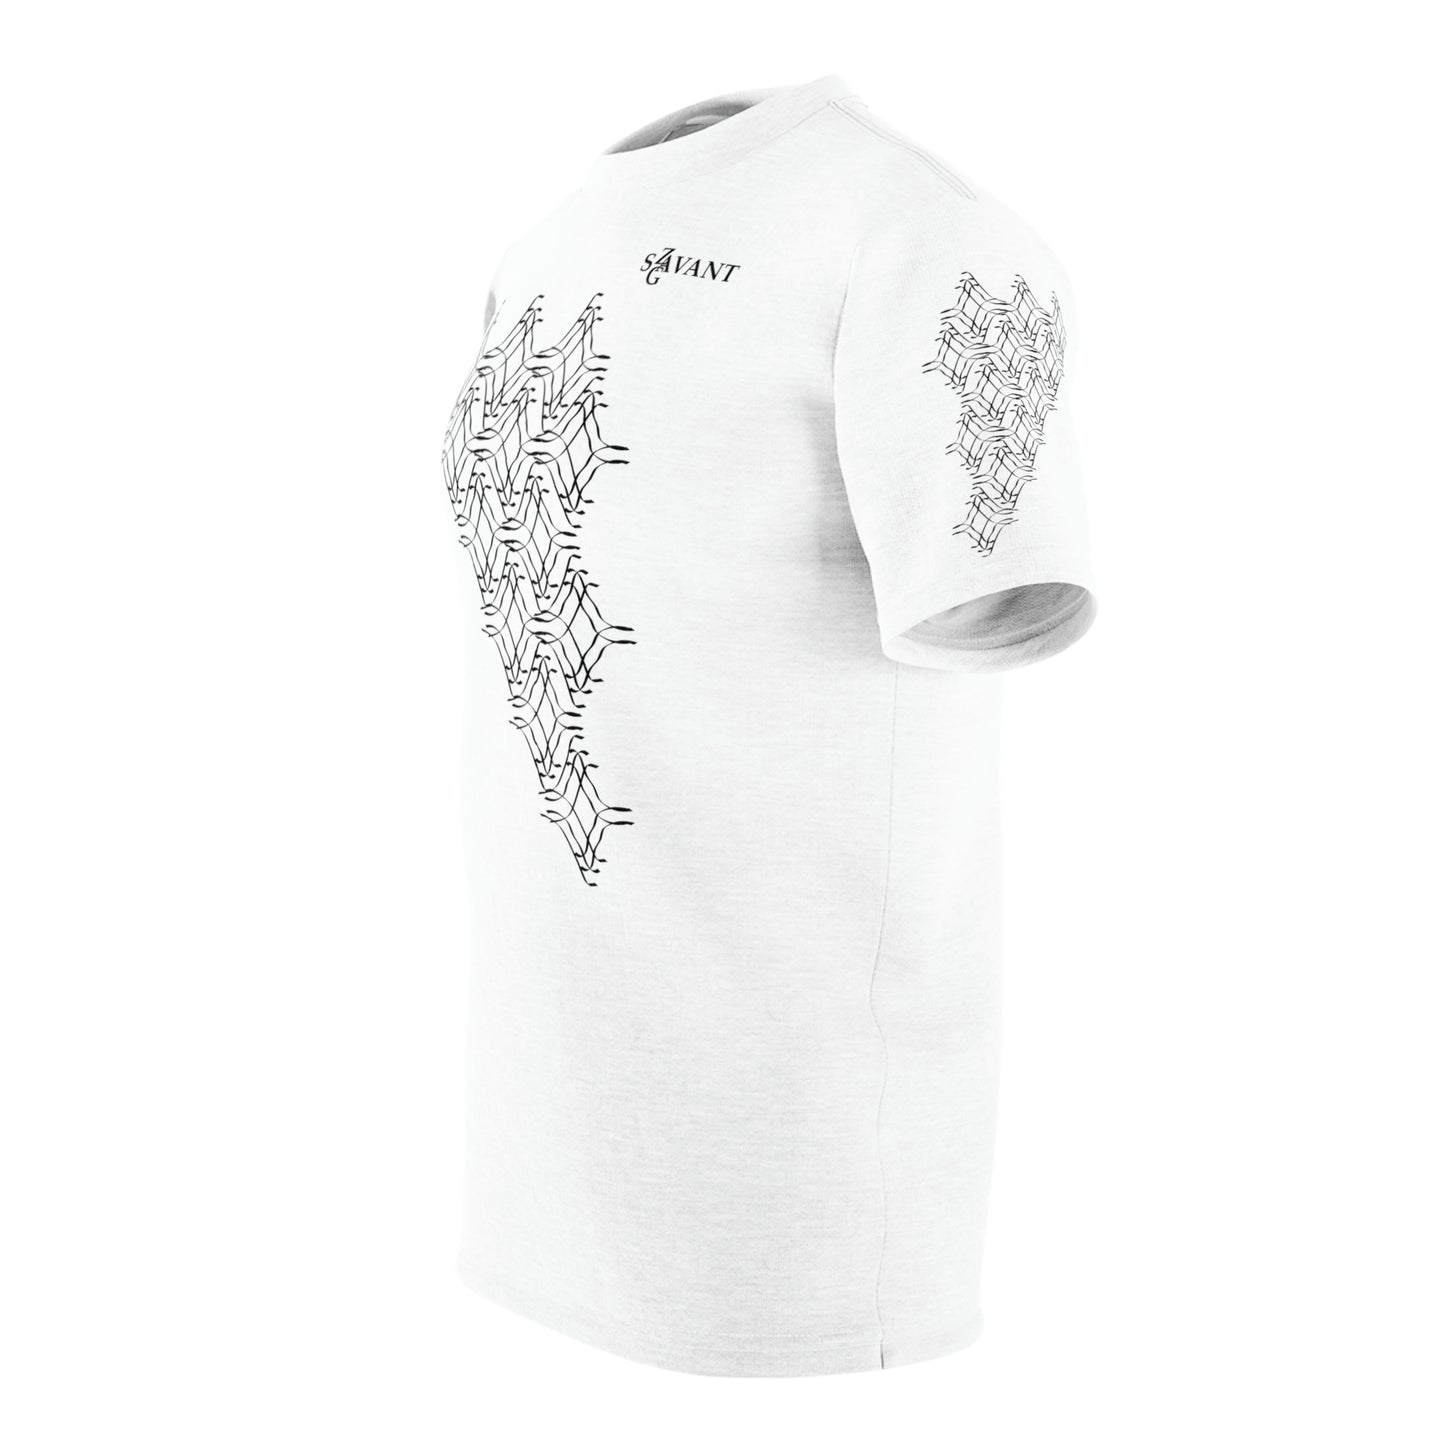 Men’s Cut & Sew Graphic T-shirt - White and Black